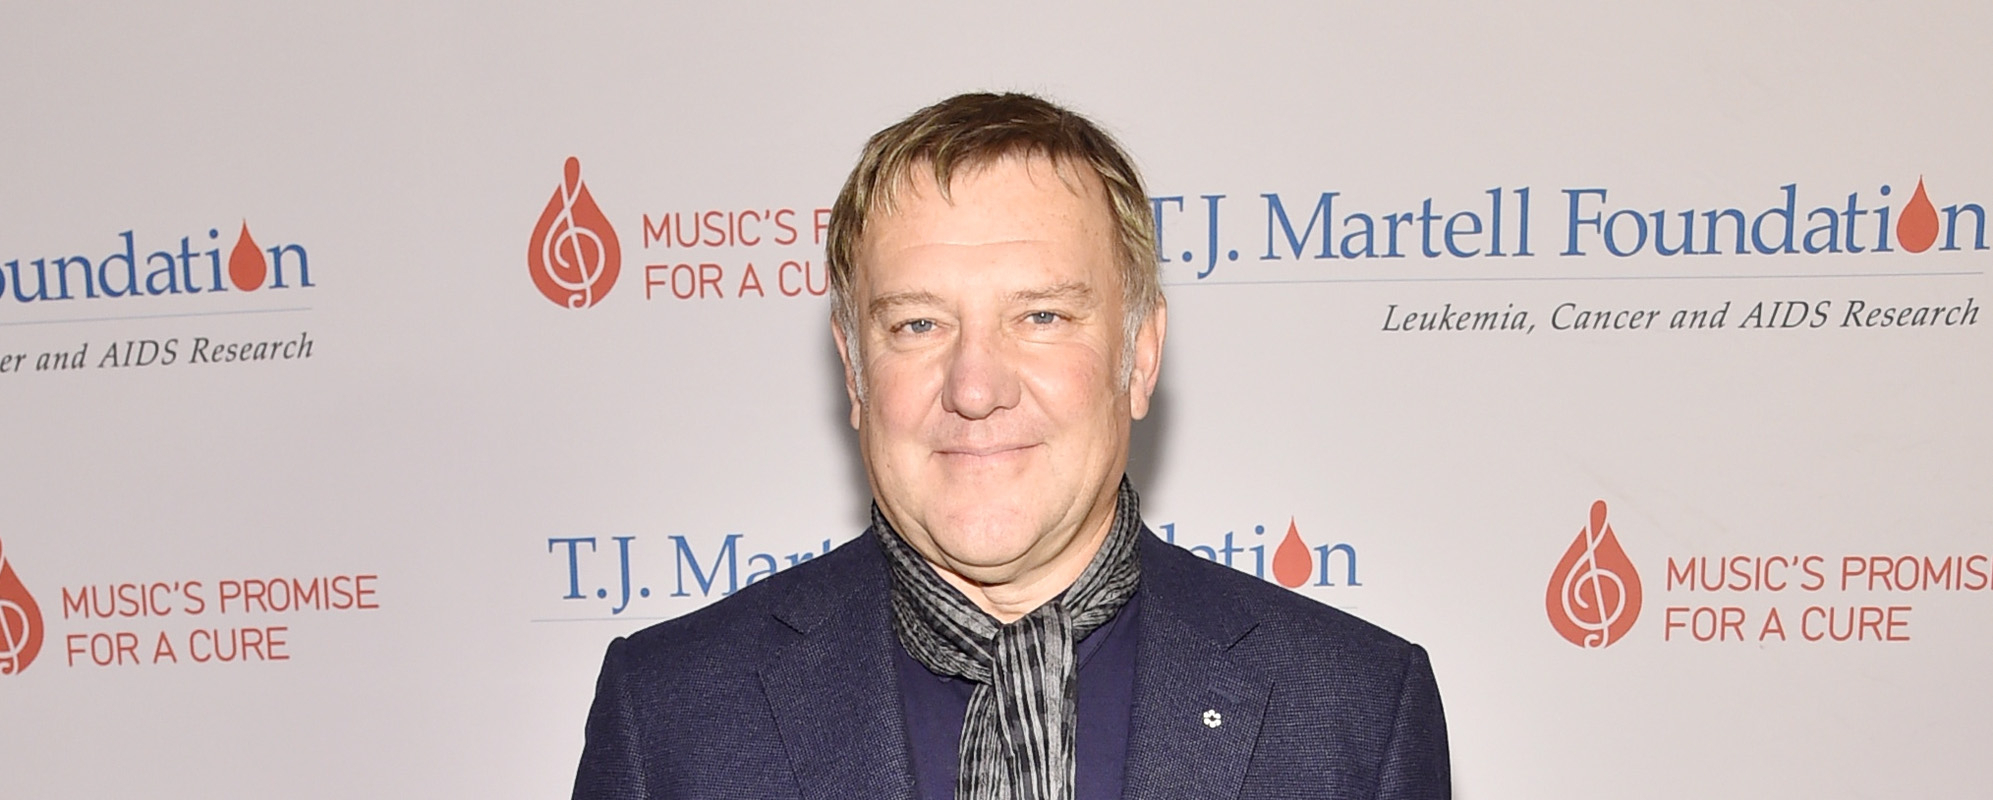 Alex Lifeson Believes Any Rush Reunion Would Be Nothing but a Cash Grab